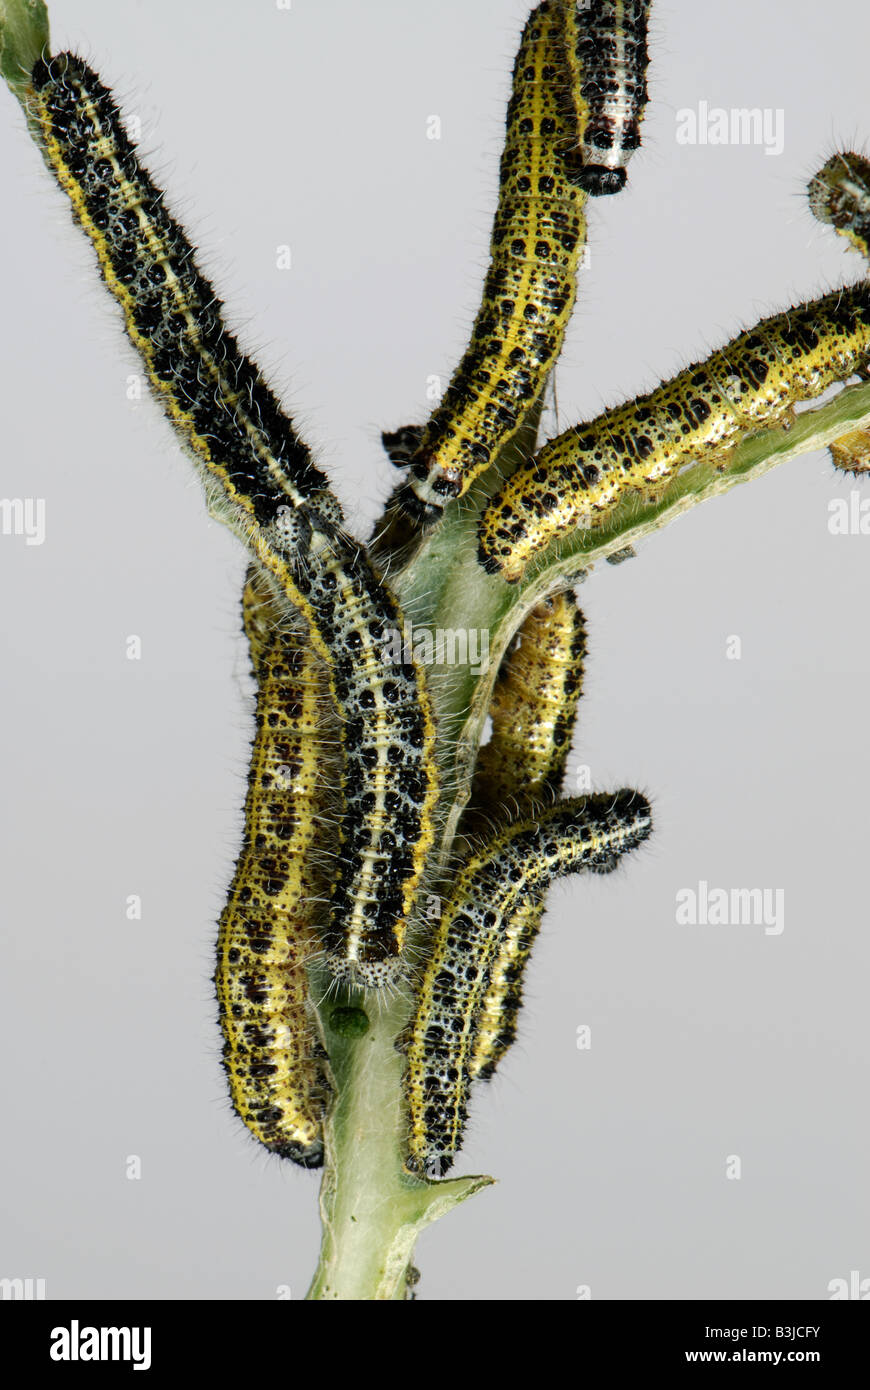 Caterpillars of a large white butterfly Pieris brassicae on congregating on stripped cabbage stem Stock Photo